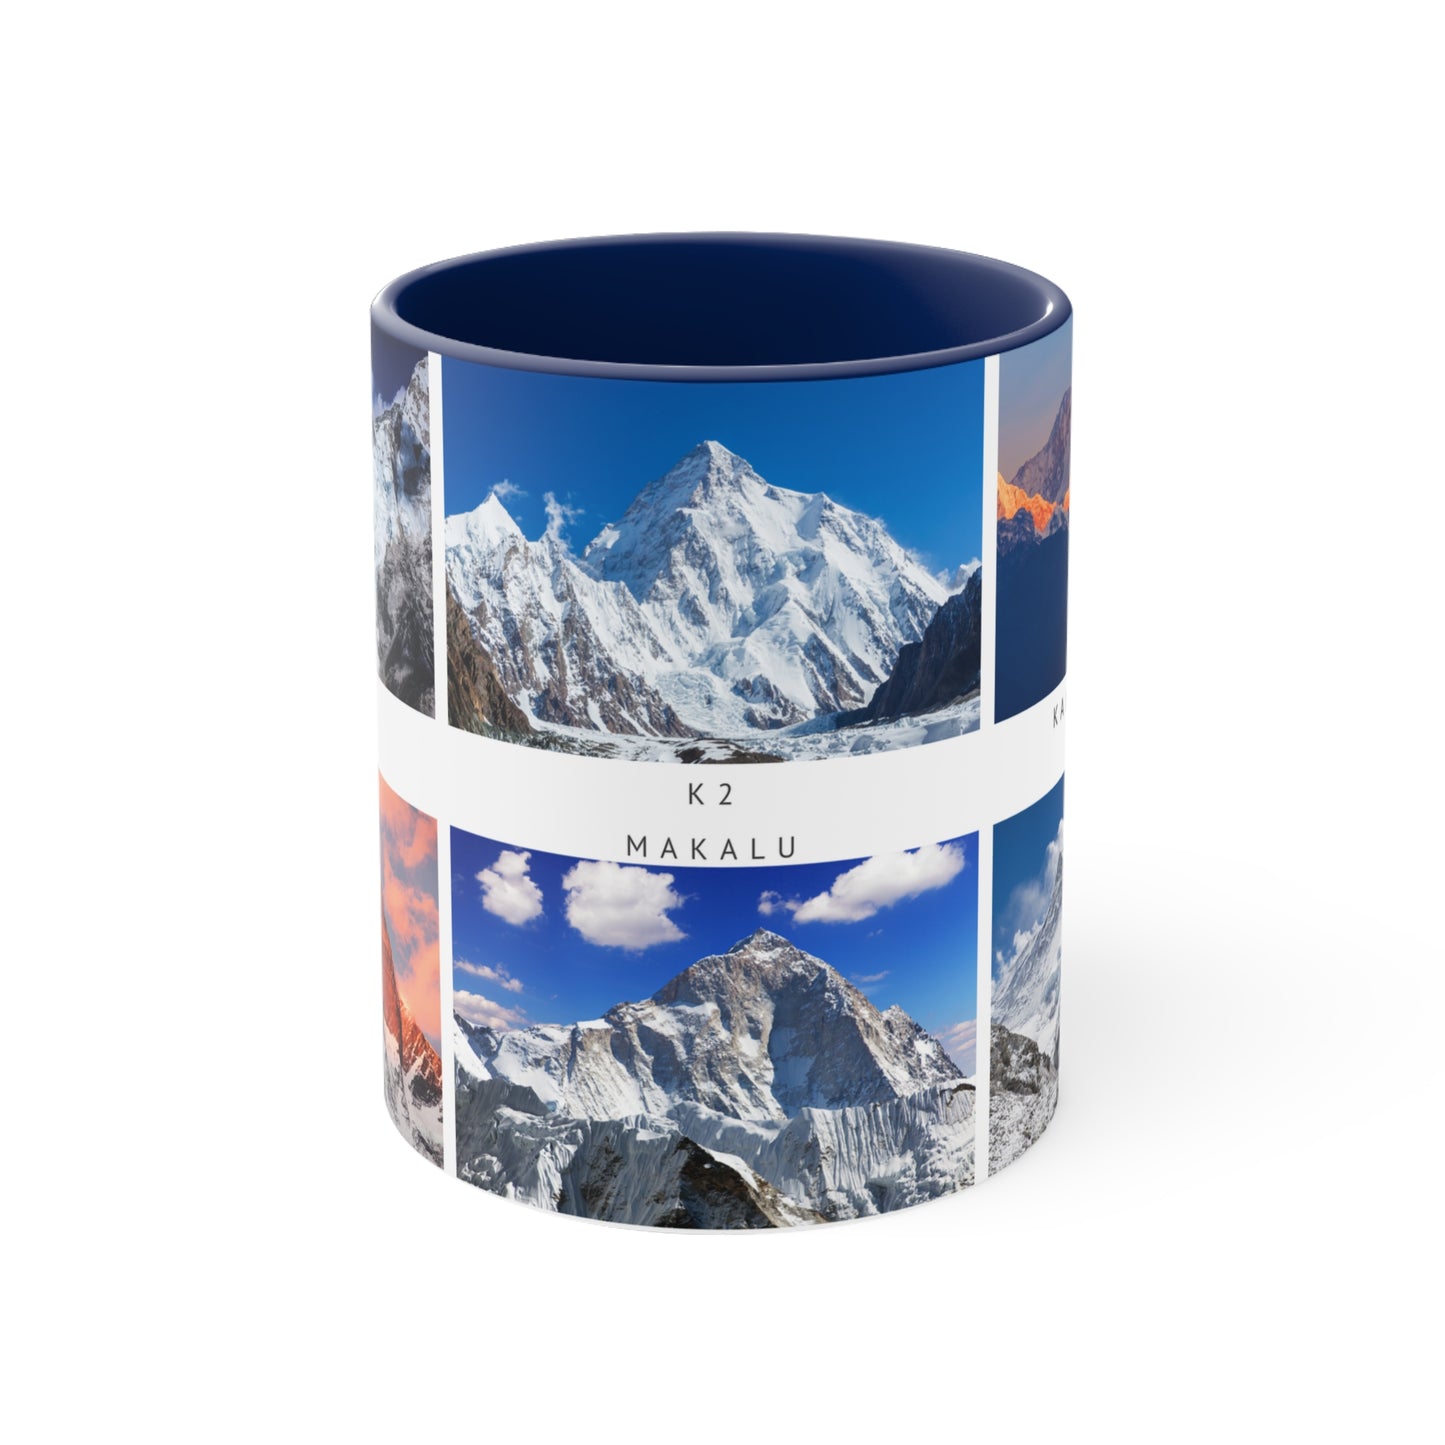 Top 6 tallest peaks in the world for the true Alpinists! This Travel Accent Coffee Mug is a part of a Travel Series for you to choose from. 11oz. Great as a gift or get one to enjoy yourself.